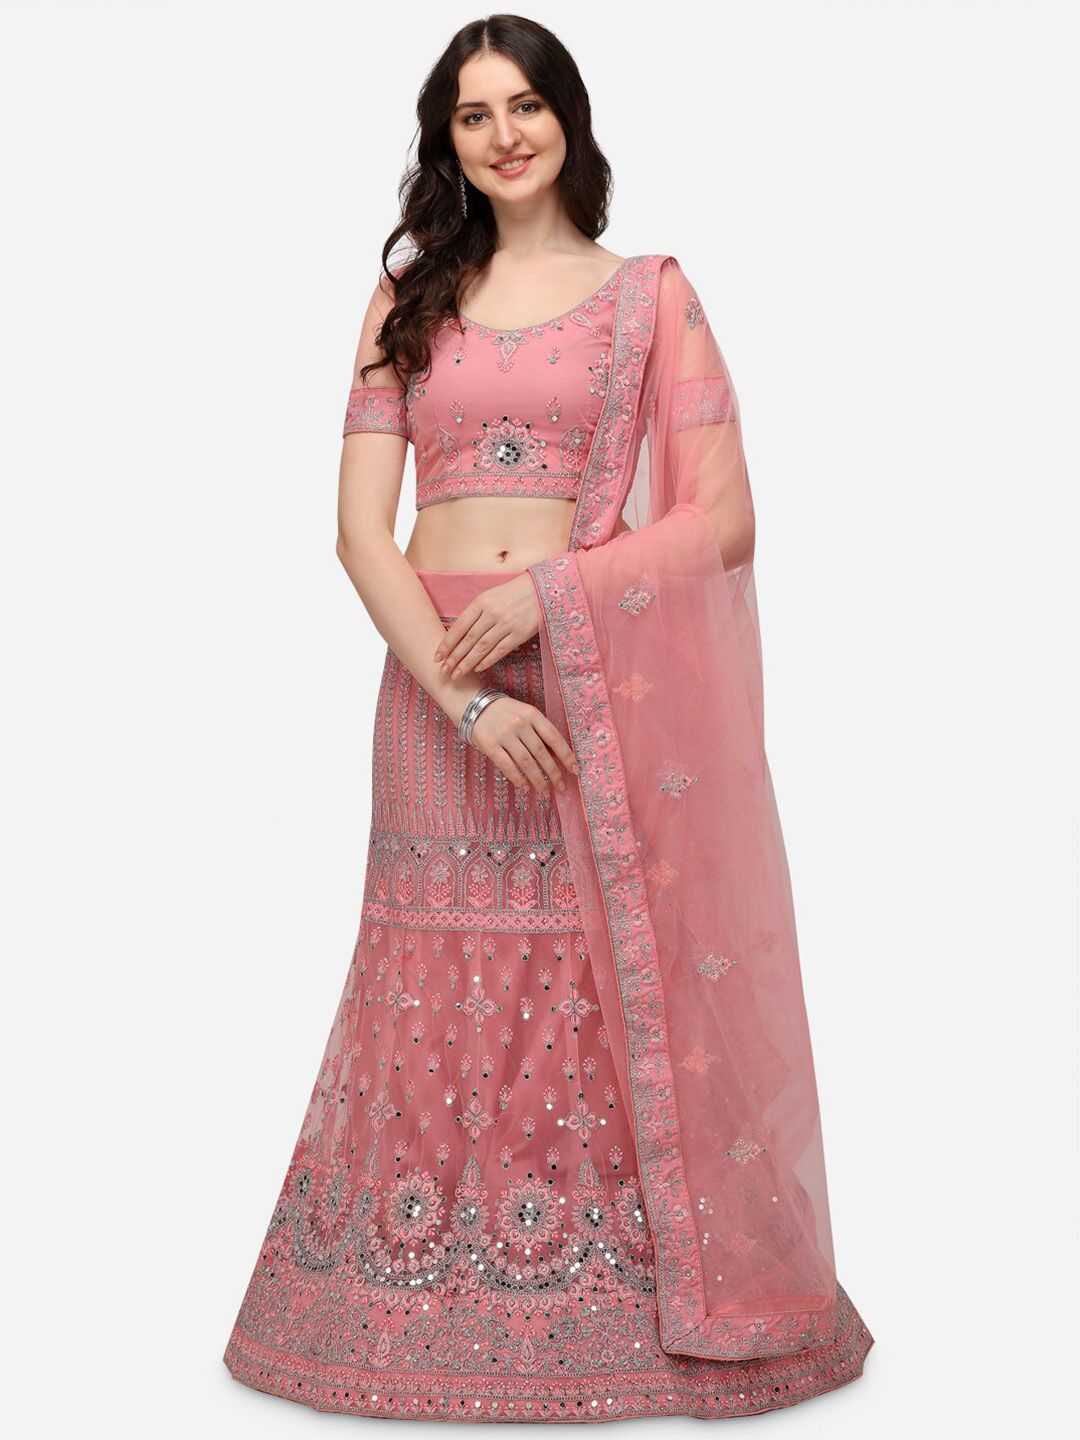 Netram Pink & Silver-Toned Embroidered Mirror Work Semi-Stitched Lehenga & Unstitched Blouse With Dupatta Price in India